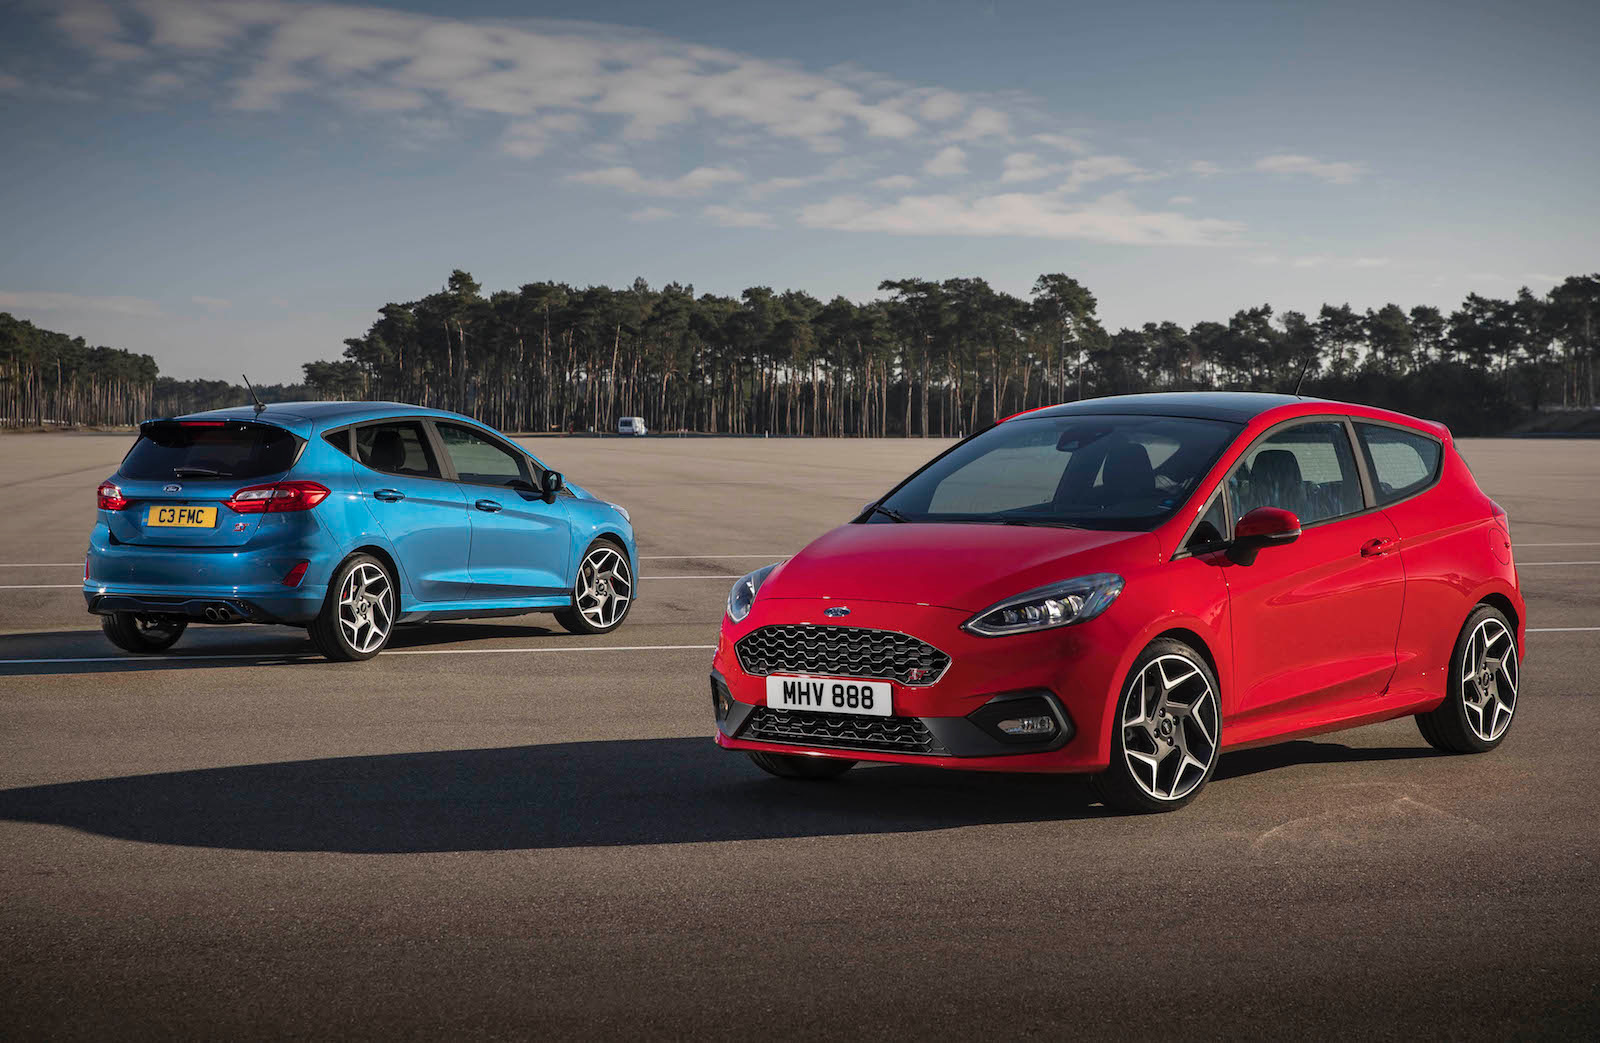 2018 Ford Fiesta ST specs revealed; Quaife diff, launch control, active exhaust